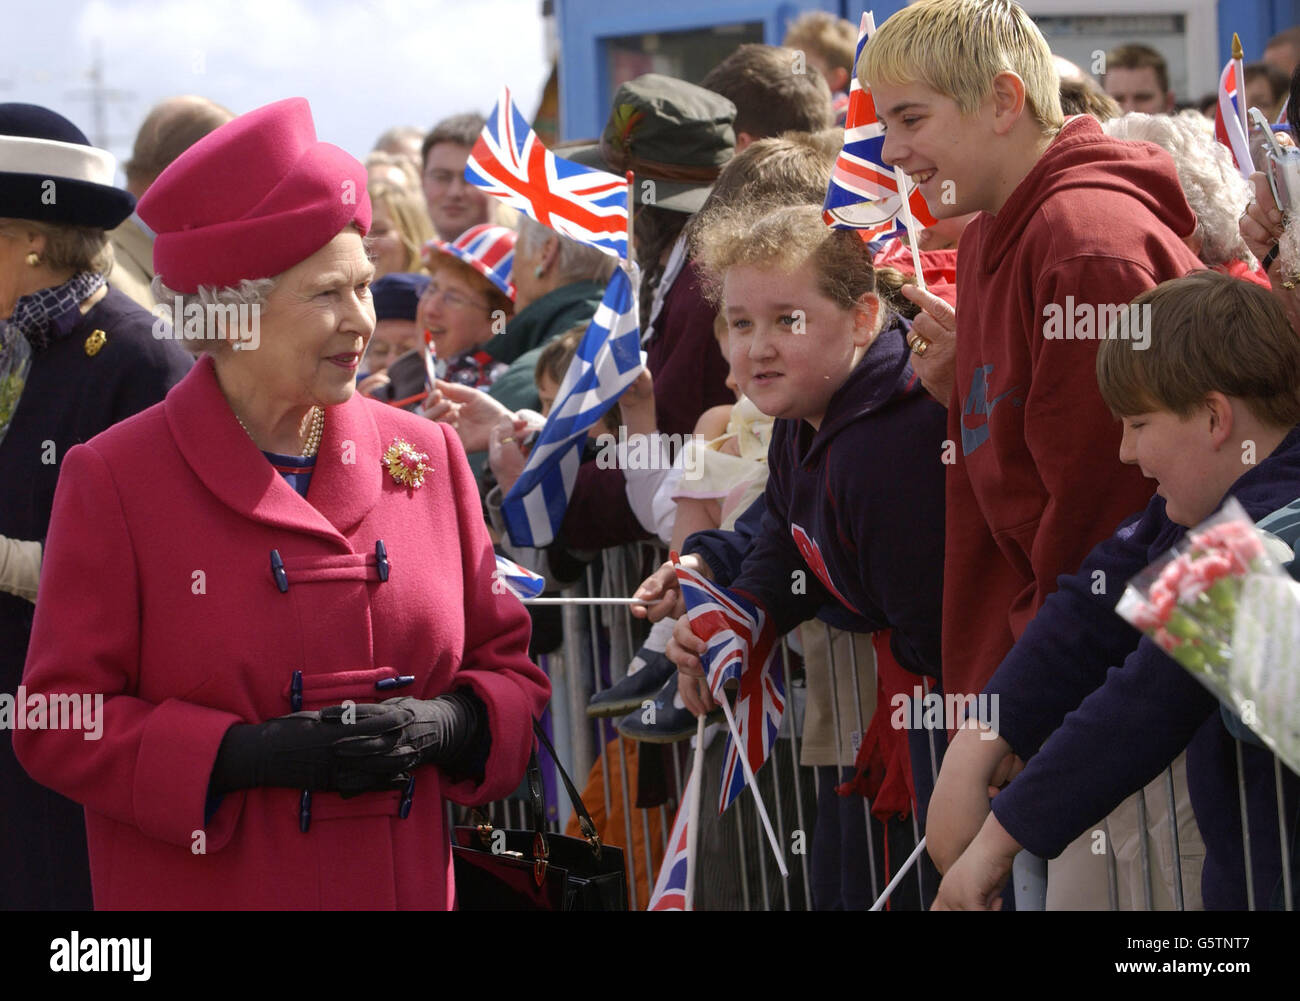 Britain's Queen Elizabeth II greets wellwishers at Falmouth harbour, on the first day of her nationwide Golden Jubilee tour which is starting with a two-day visit to the West Country. * In the coming weeks, the 76-year-old monarch will visit every region of England, Scotland, Wales and Northern Ireland. Stock Photo